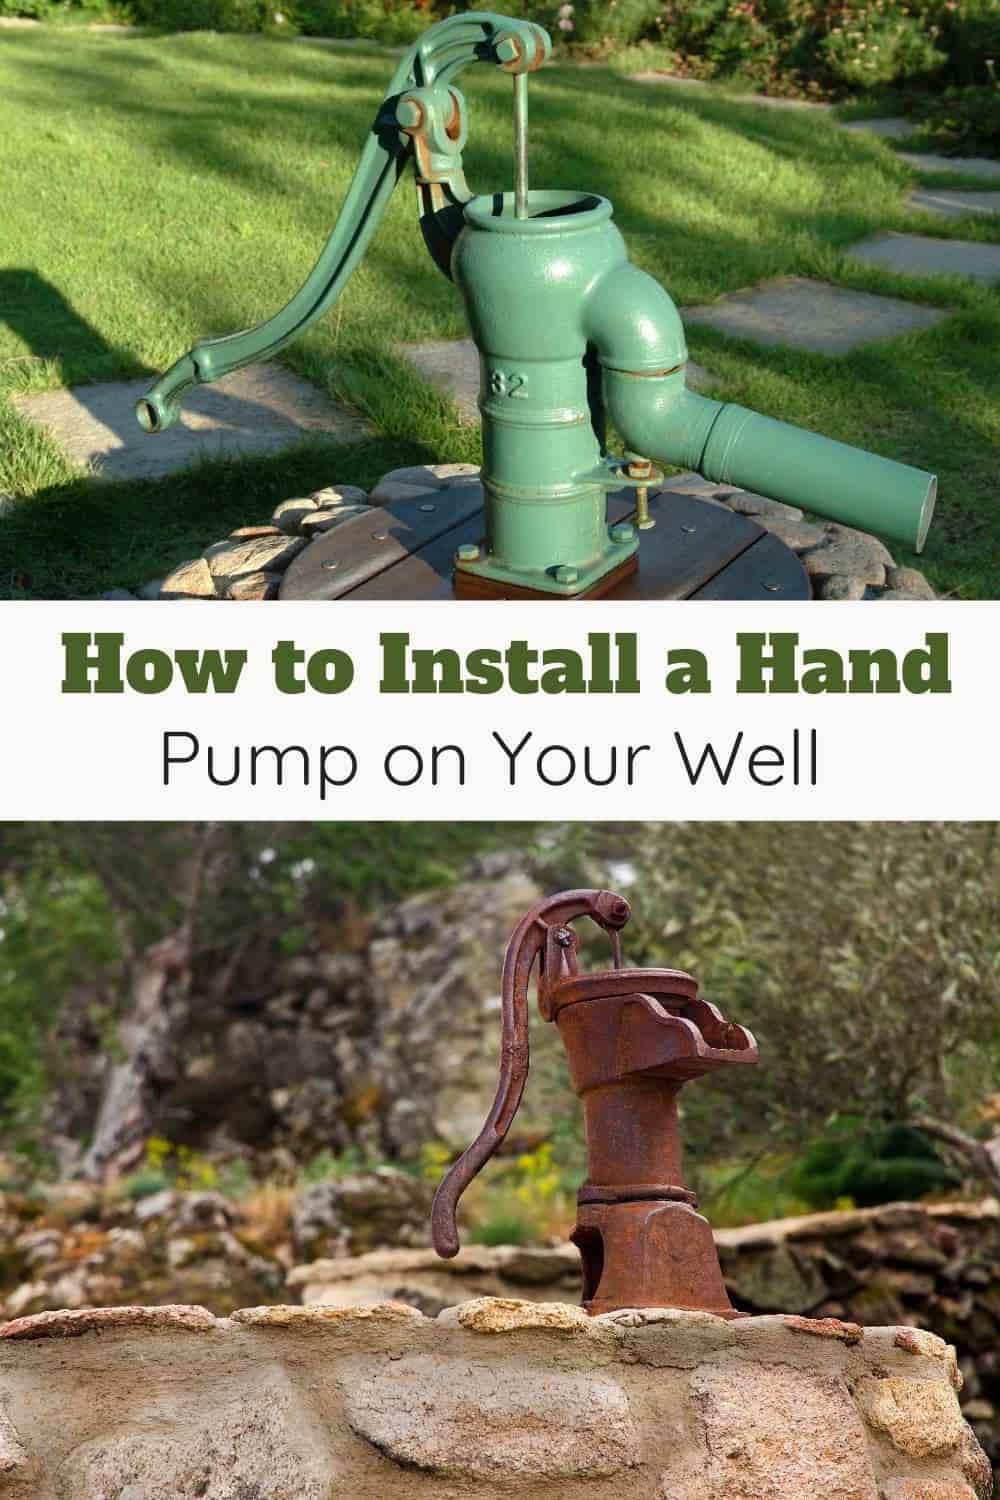 How To Install A Hand Pump On Your Well